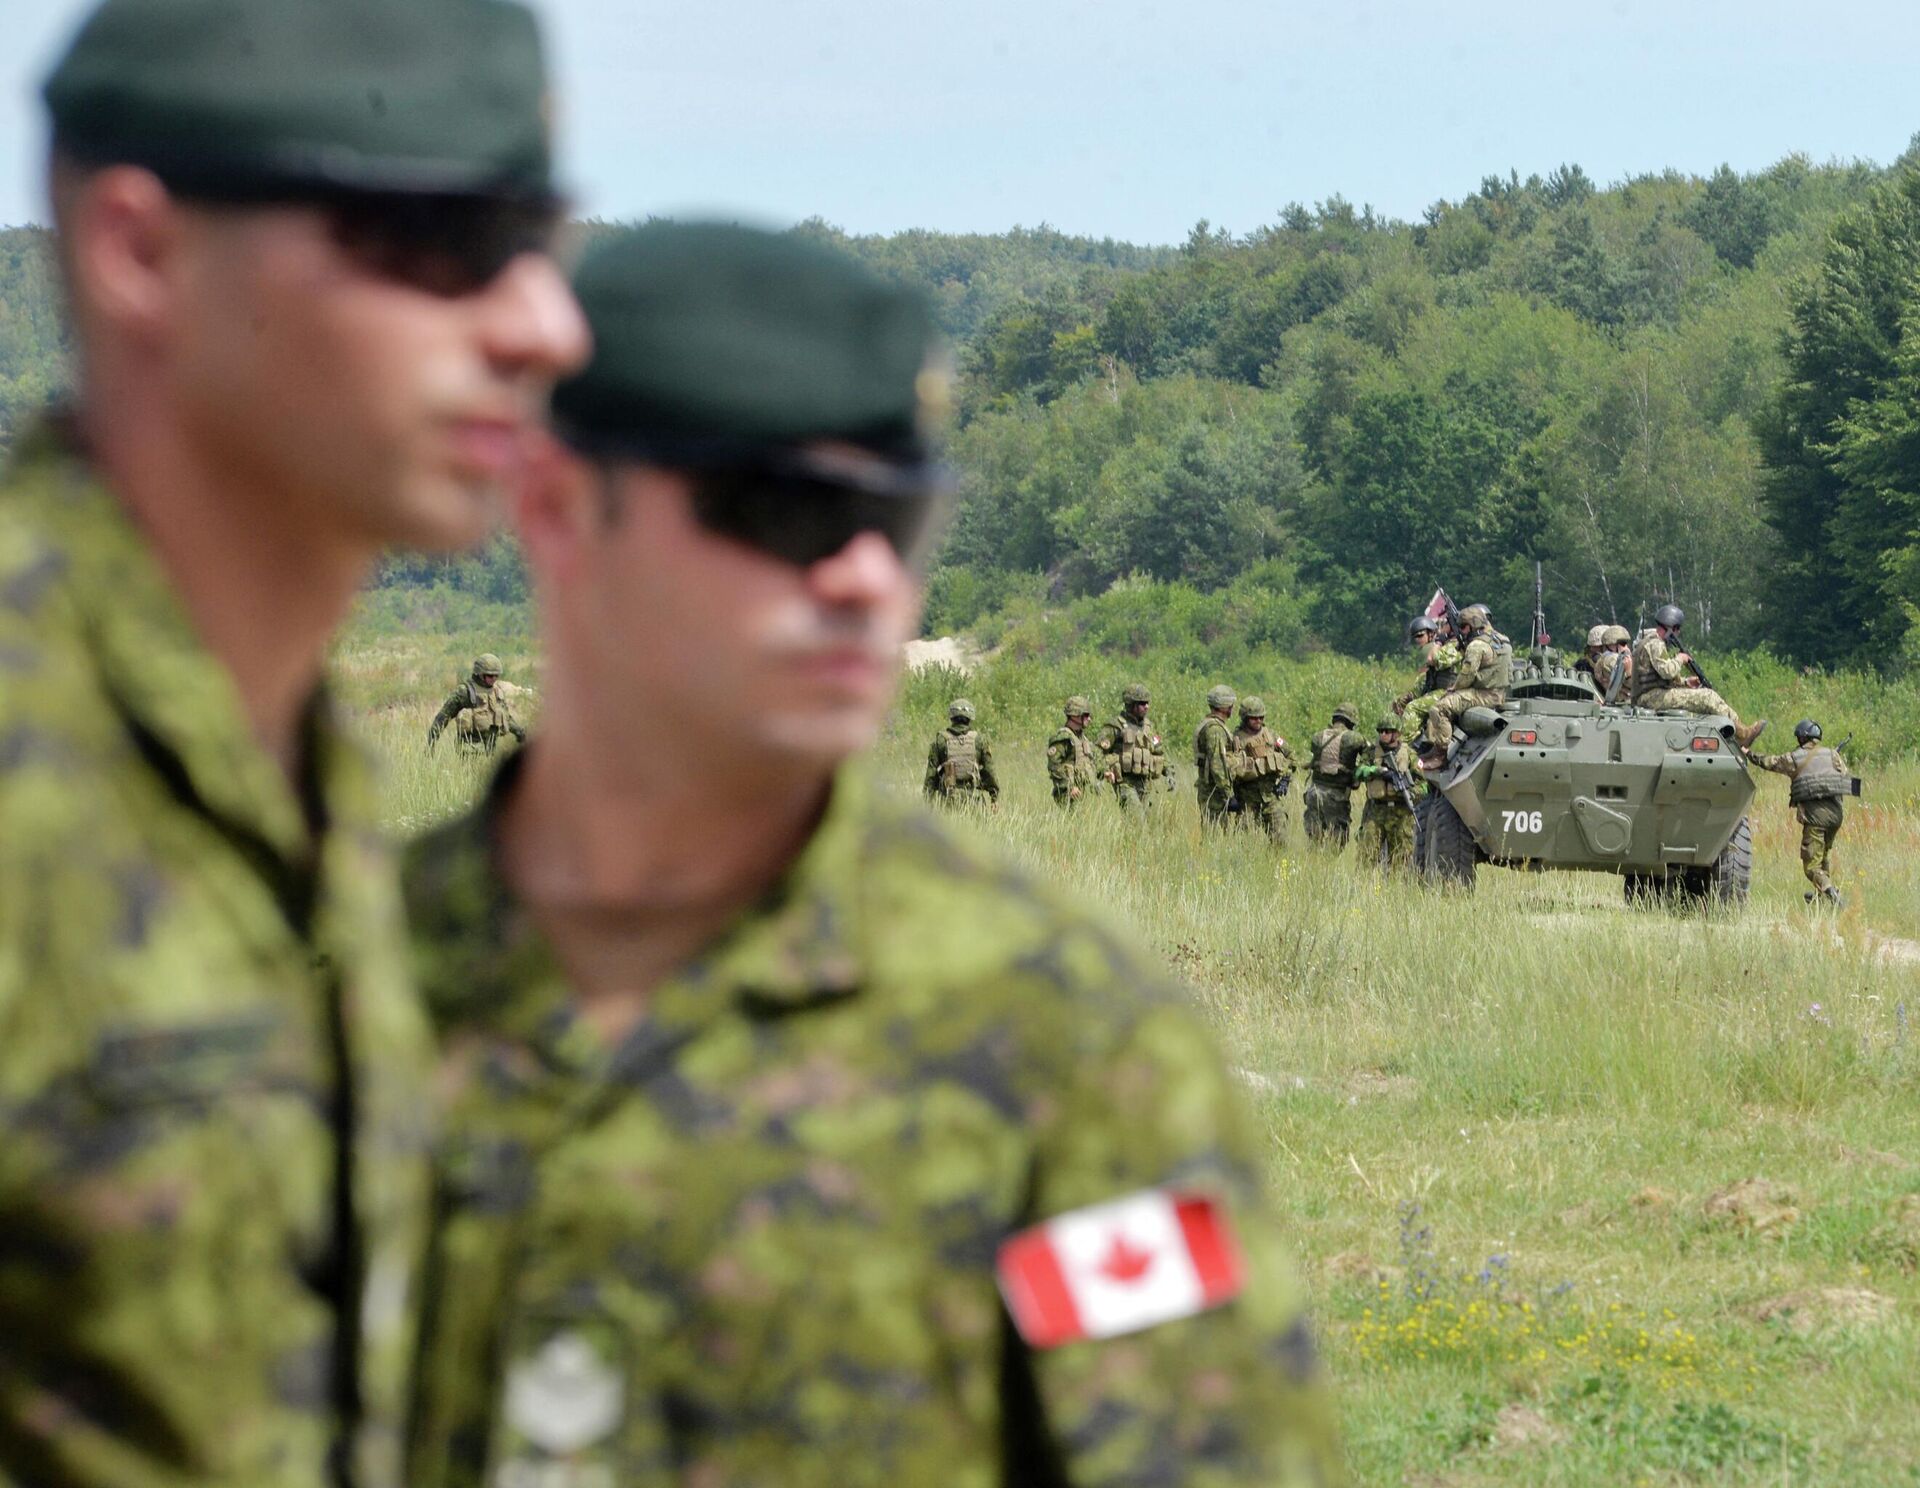 Canadian military instructors look on during Ukrainian military exercises at the International Peacekeeping and Security Center in Yavorov, near Lvov, on July 12, 2016 - Sputnik International, 1920, 23.10.2022